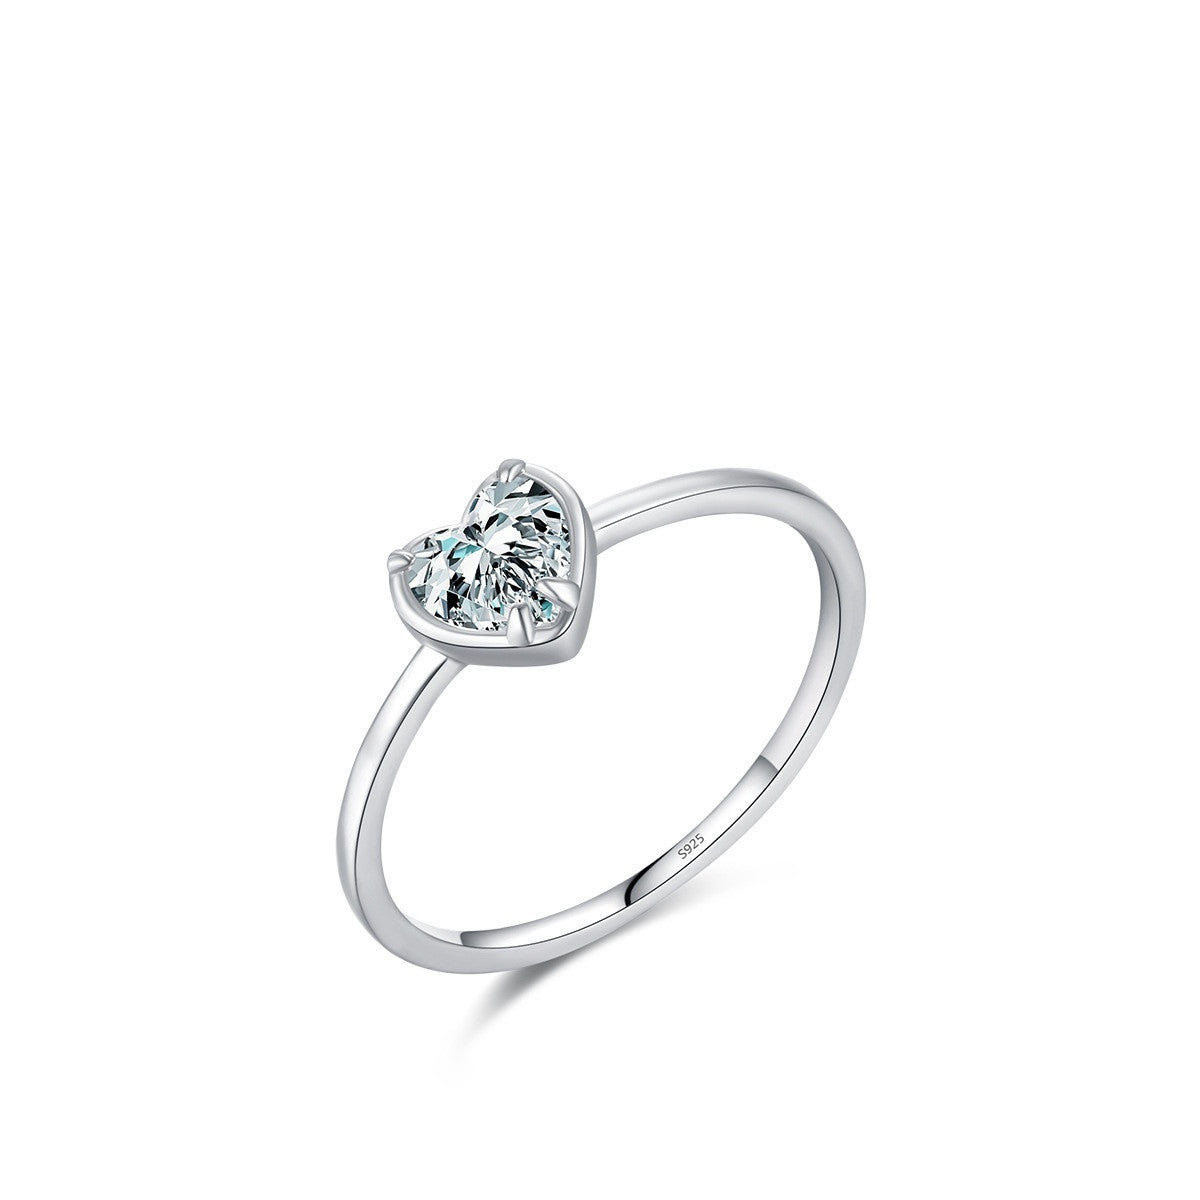 S925 Sterling Silver Sweet Heart Marriage Engagement Ring - Jewel Nexus